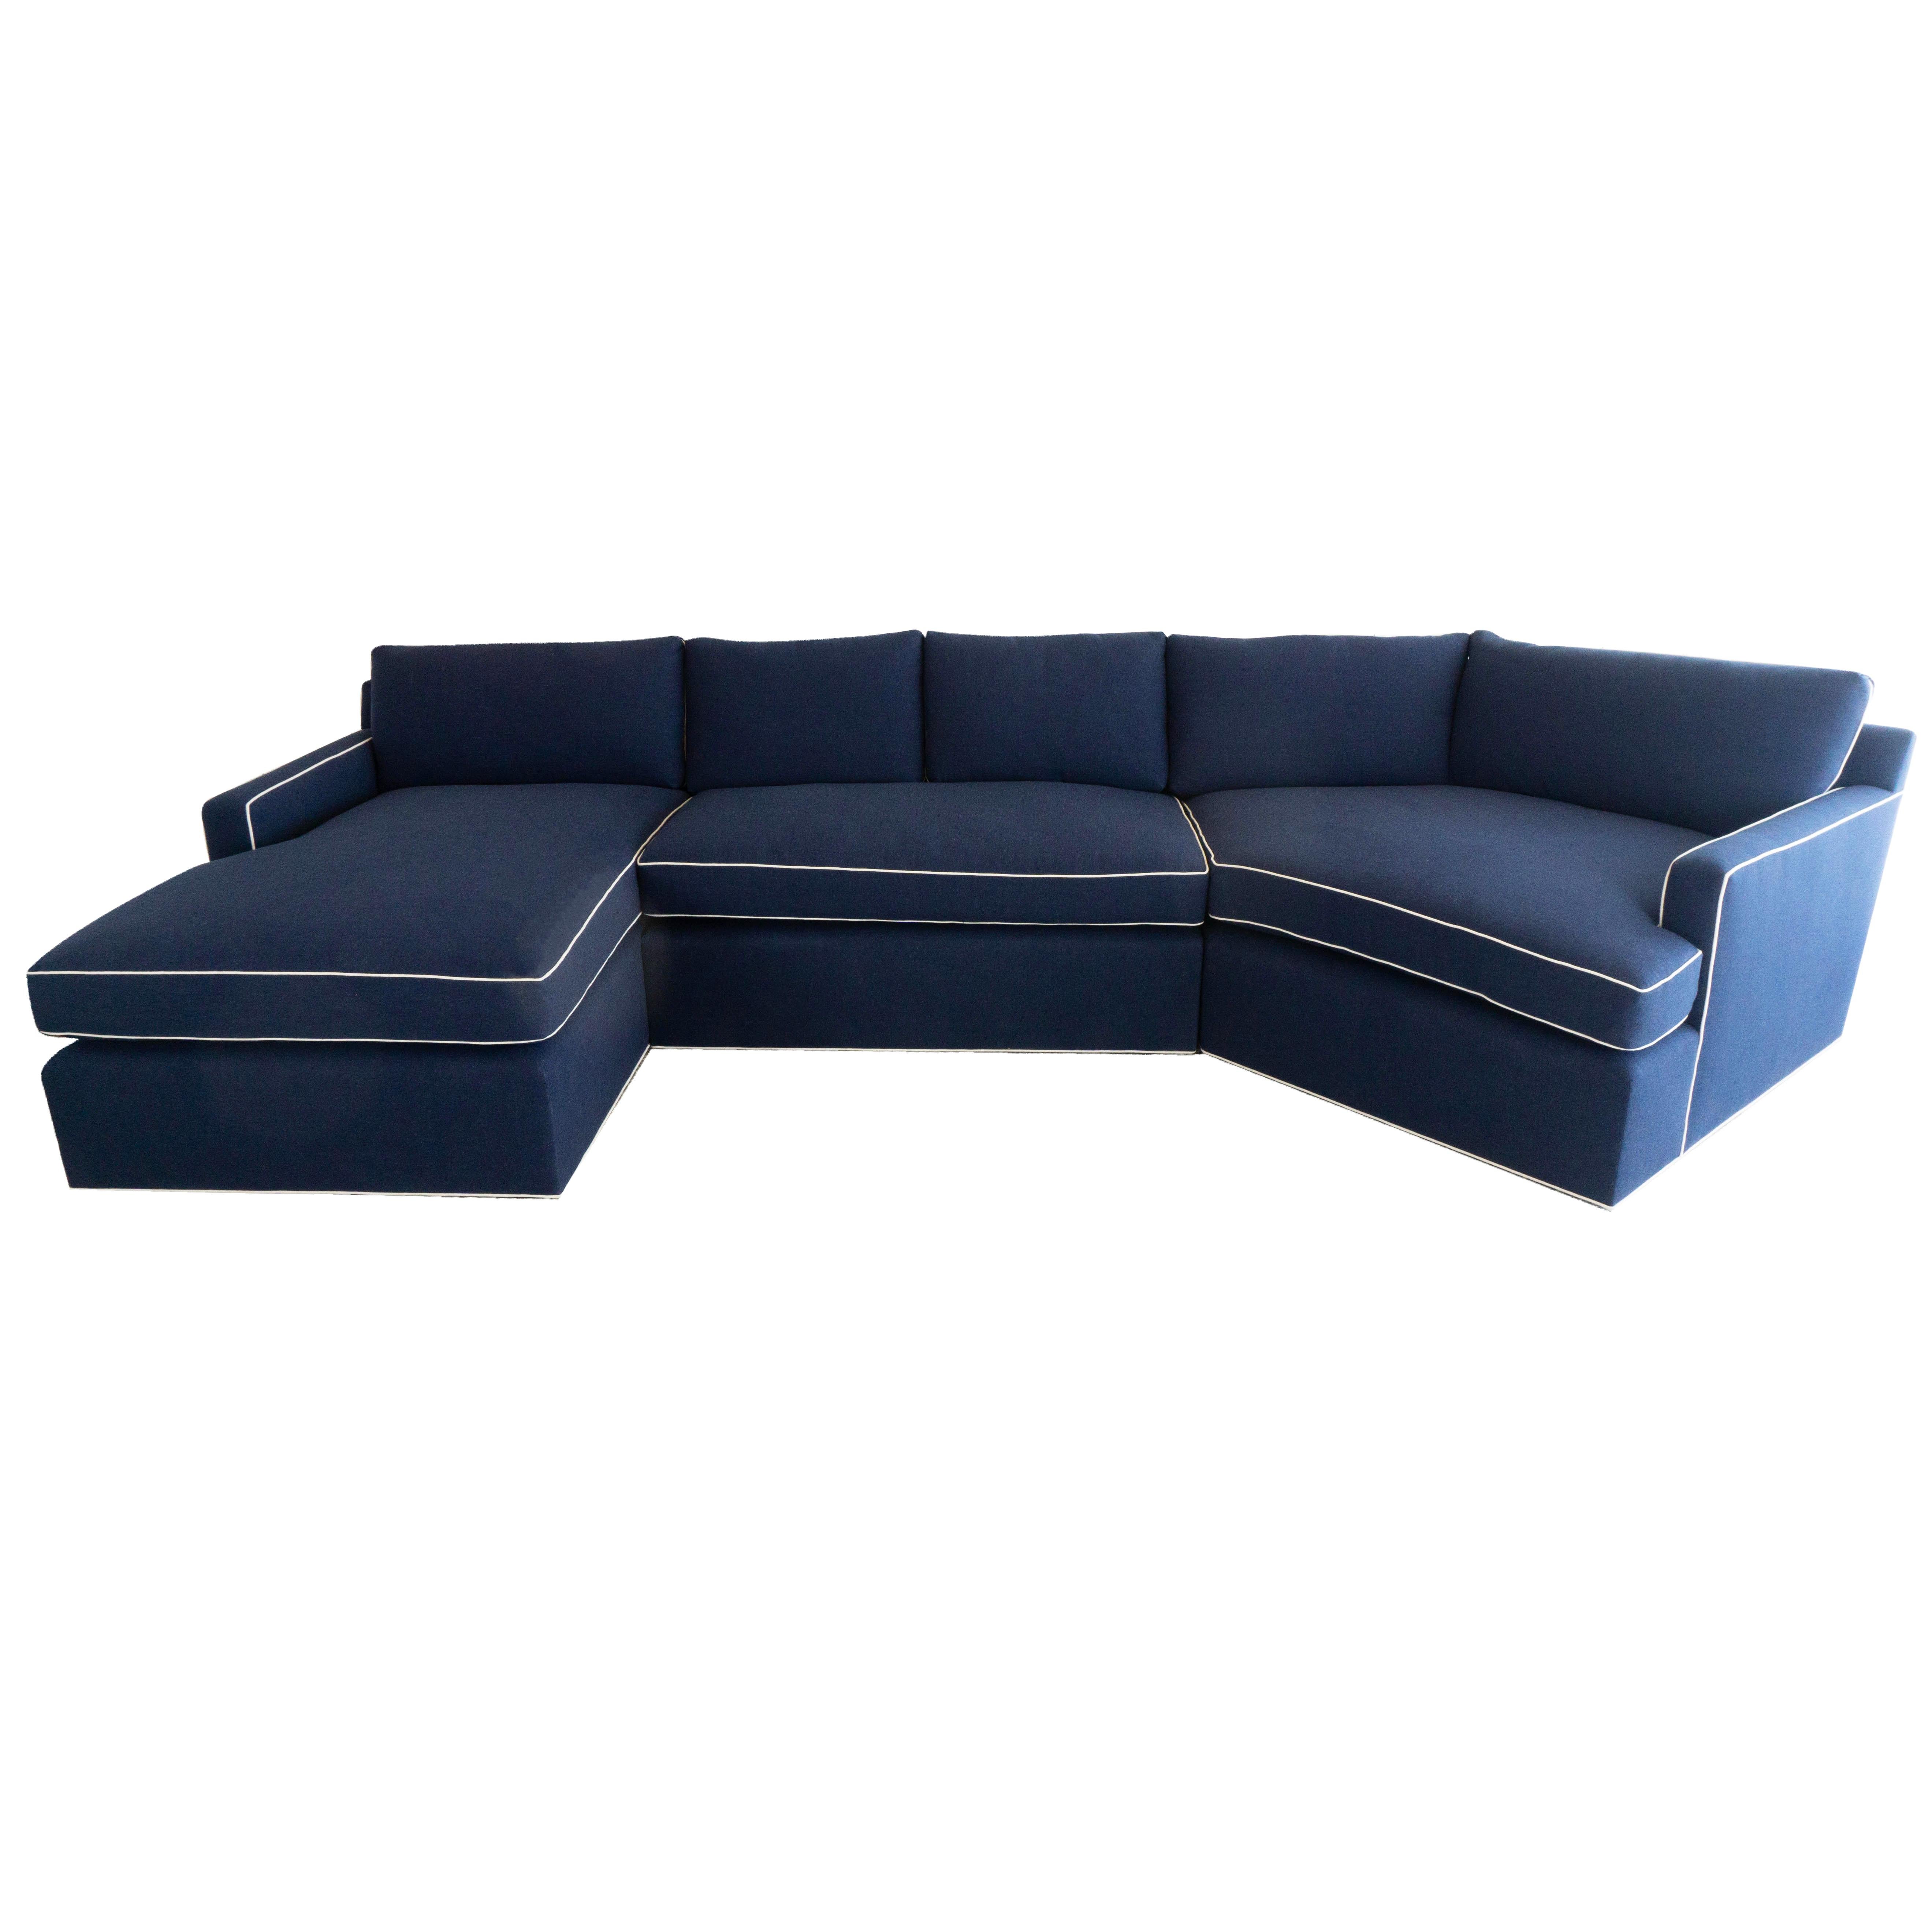 Large Custom Sectional Sofa with Chaise Lounge For Sale at 1stDibs | chaise  lounge sofa, extra deep sectional sofa with chaise, chaise lounge sectional